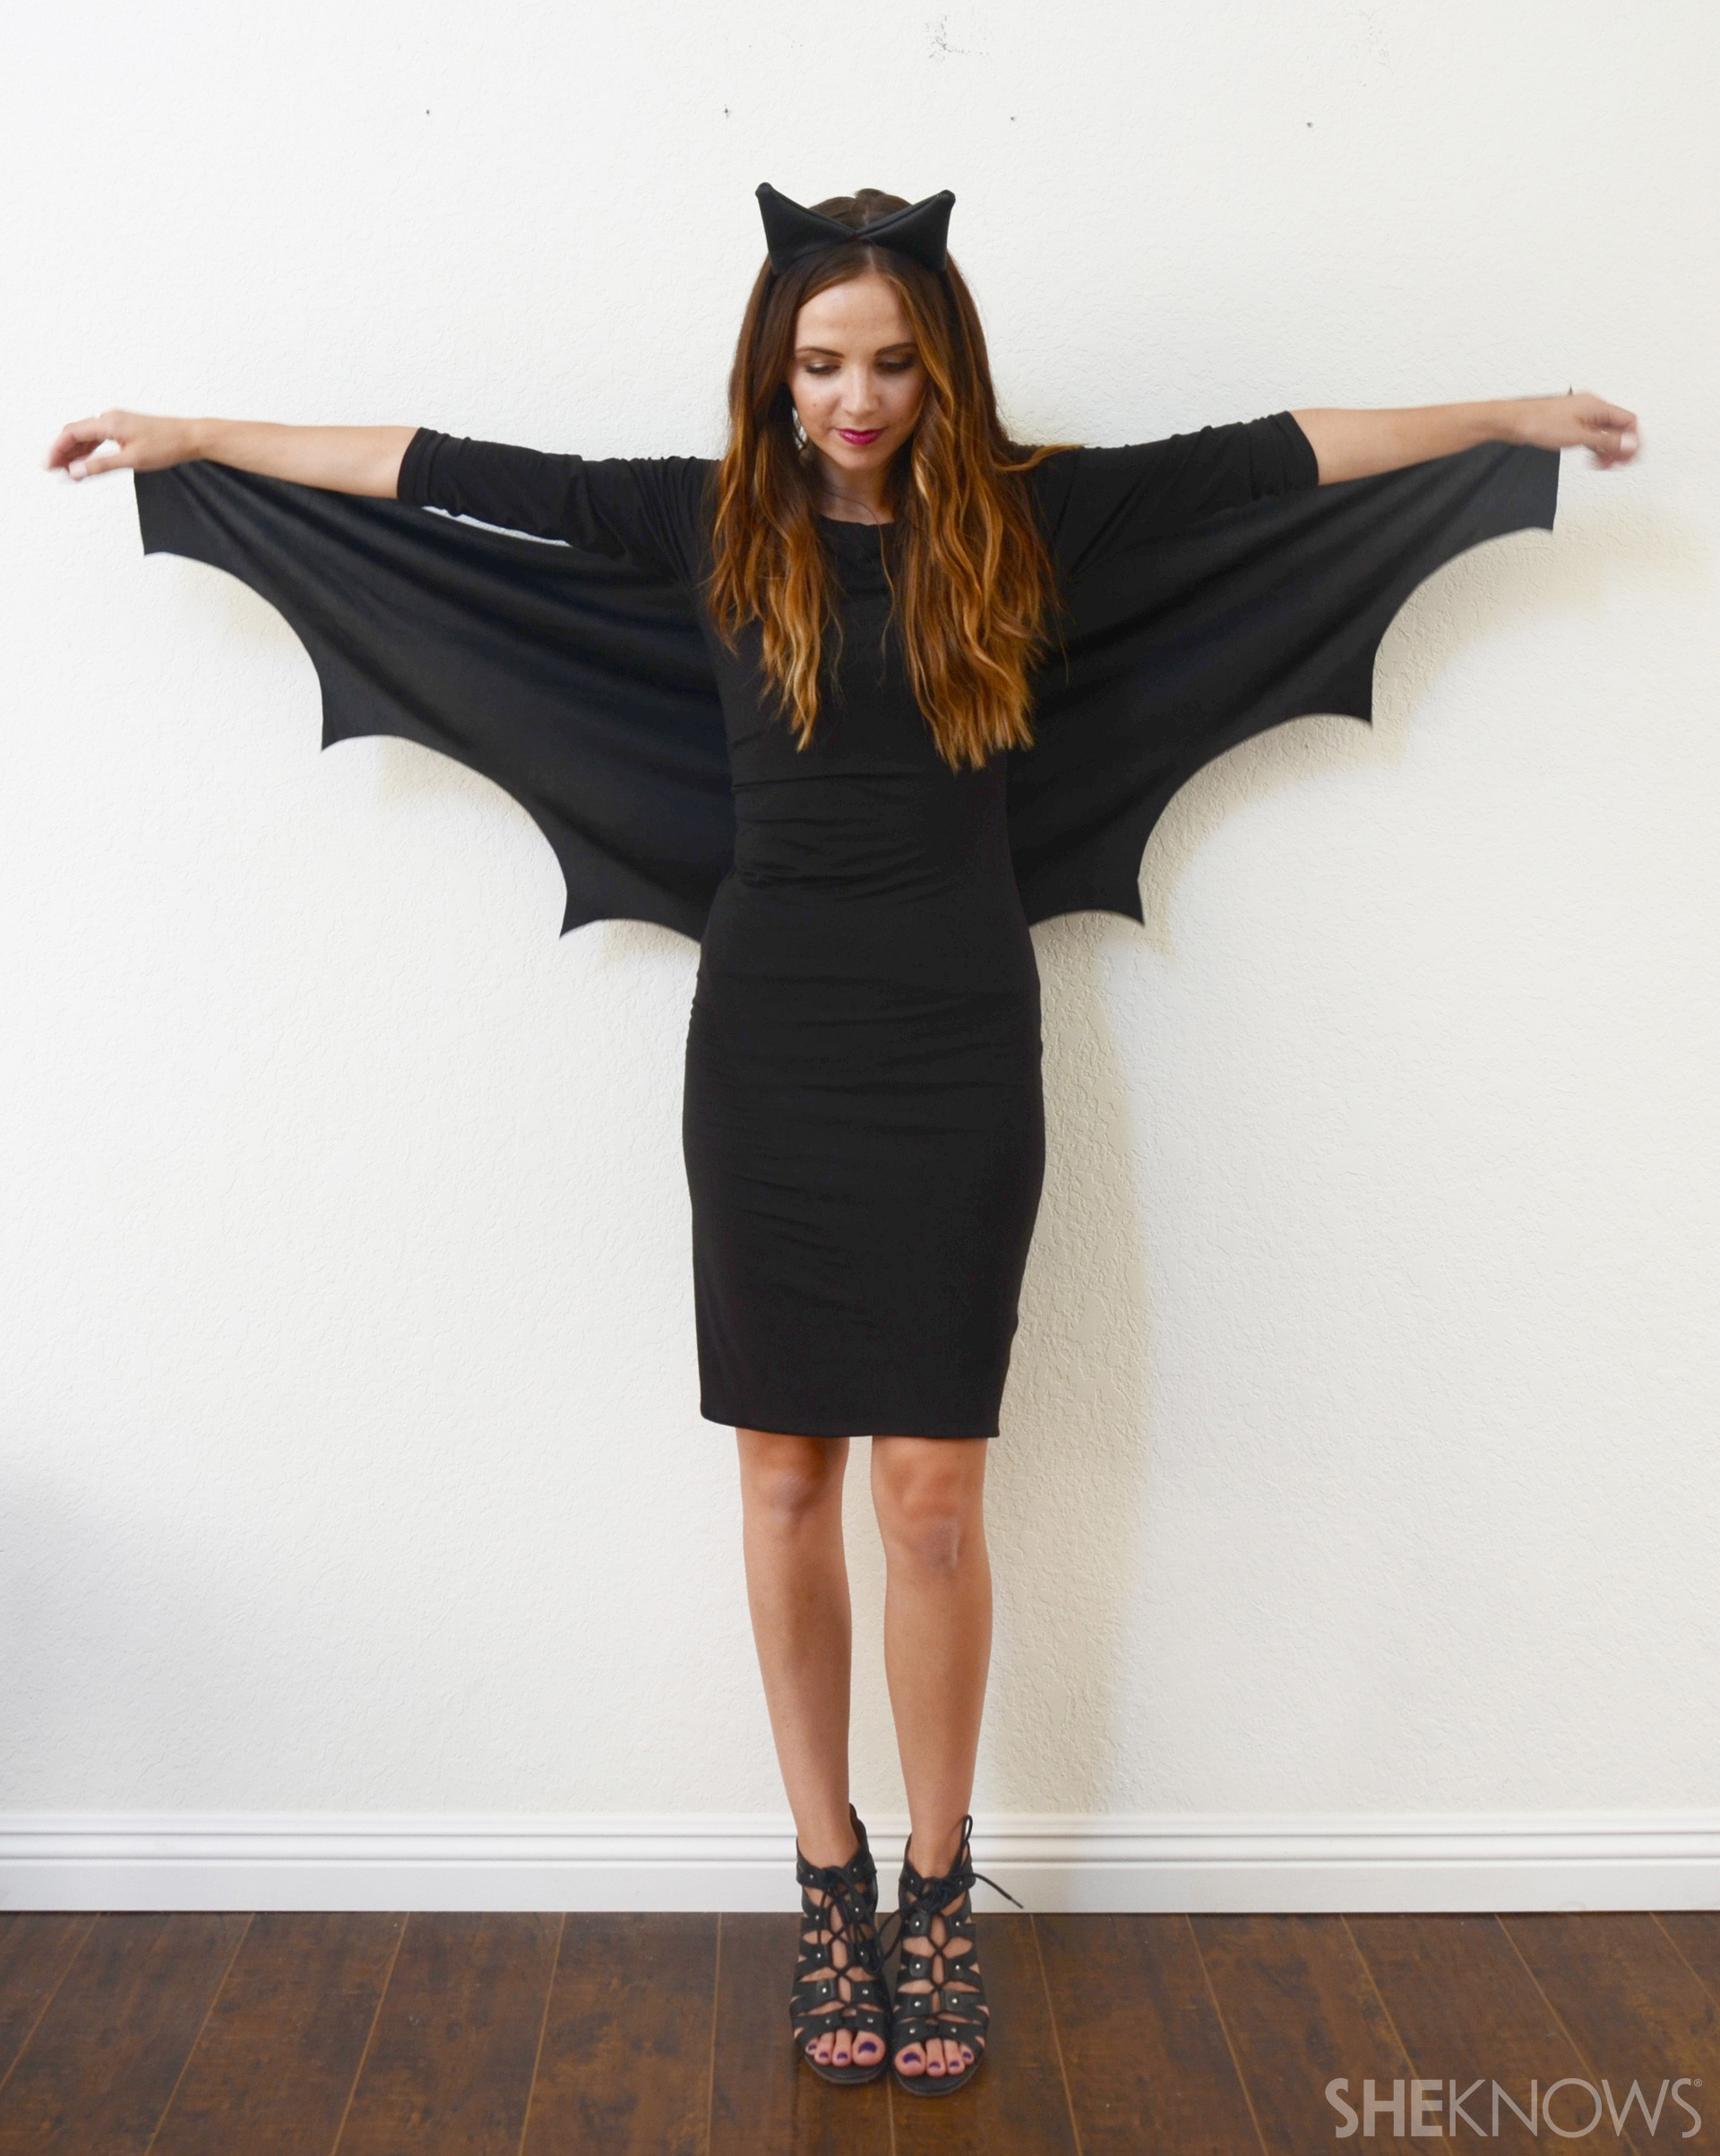 DIY Costume For Girls
 A DIY Bat Costume so Easy No e Will Know It ly Took 10